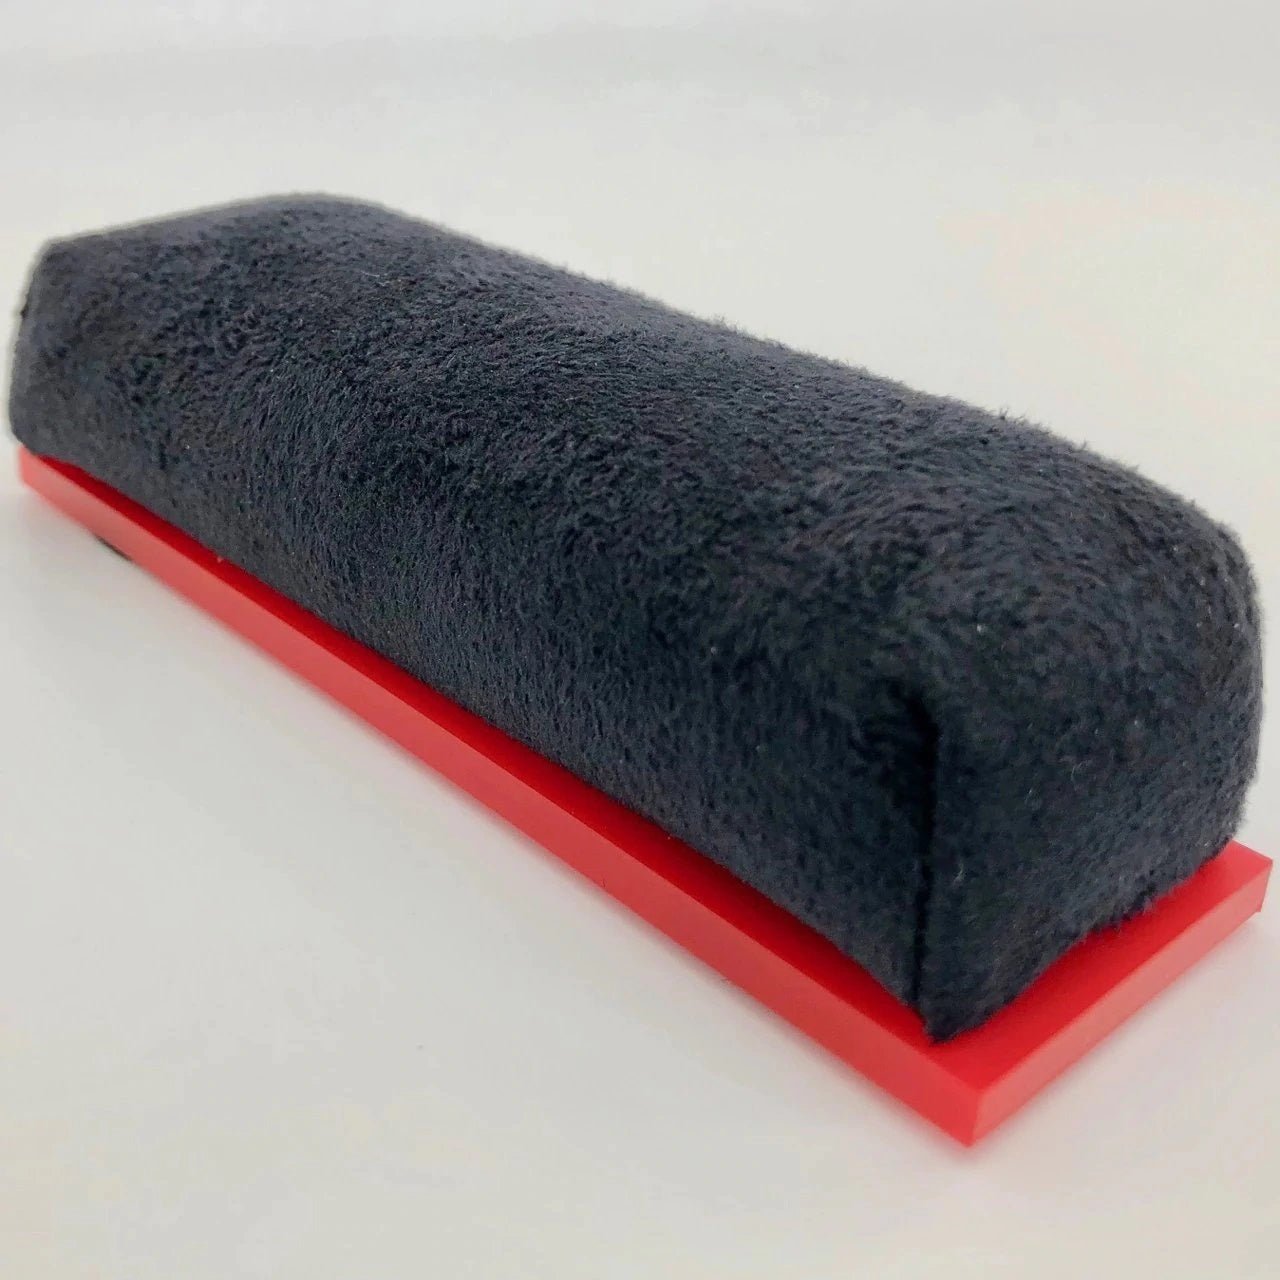 GrooveWasher - Replacement Cleaning Pad (All purpose, highly absorbent, split fiber microfiber fabric, US made) - 866508000252 - Vinyl Accessories - Yellow Racket Records